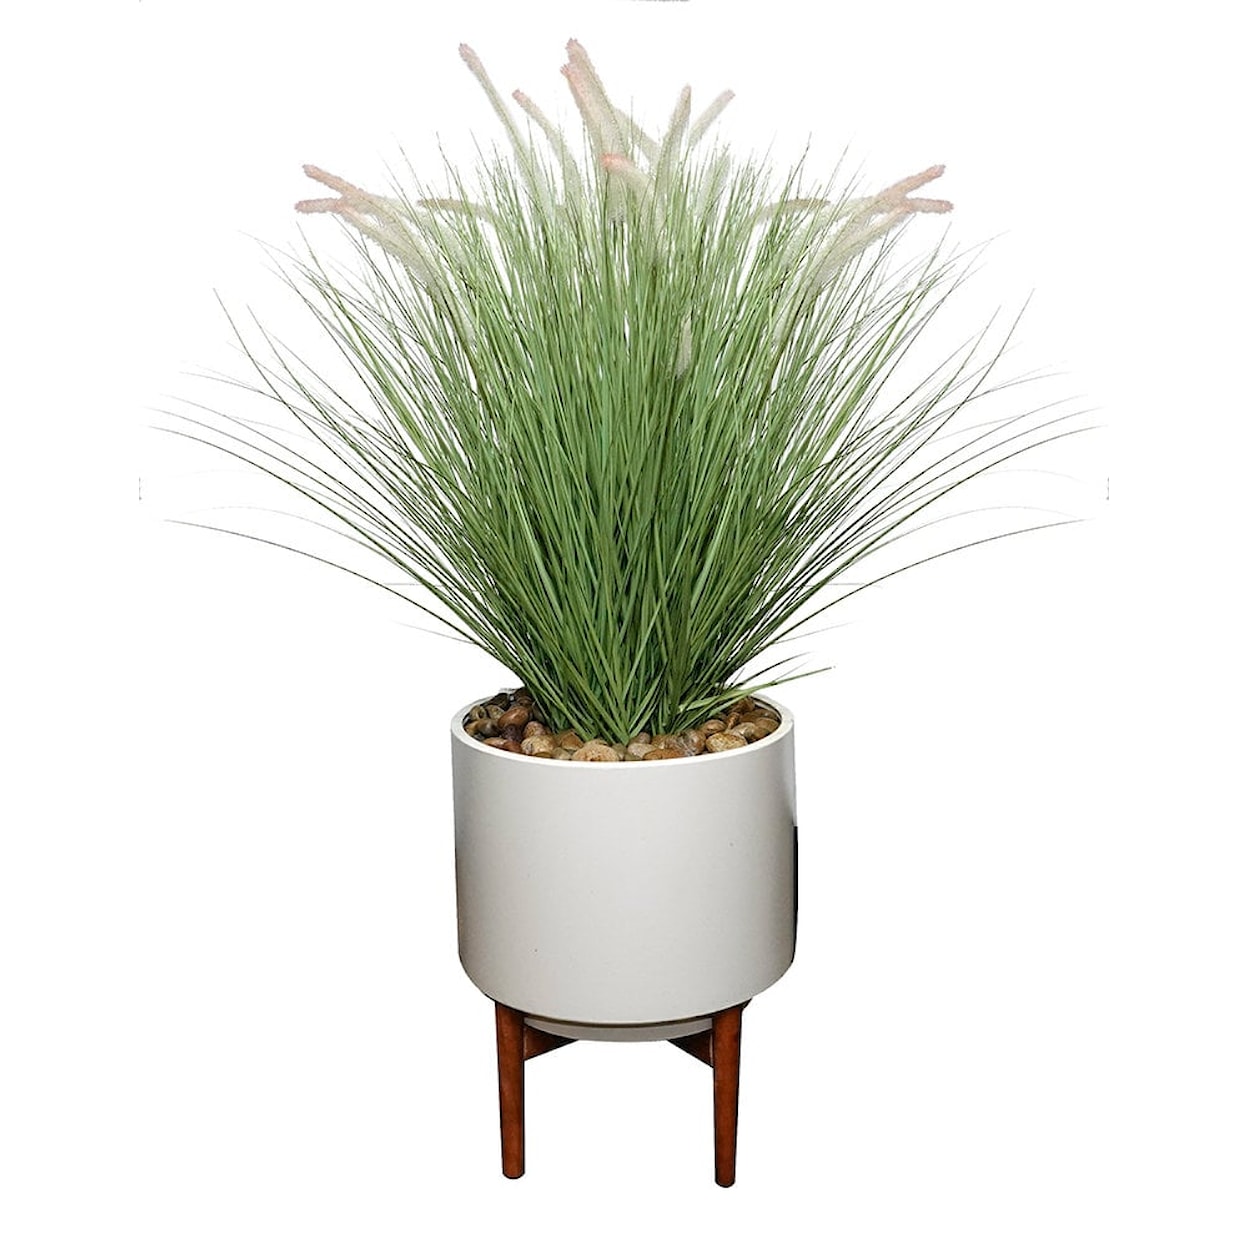 The Ivy Guild Botanicals FOUNTAIN GRASS LARGE